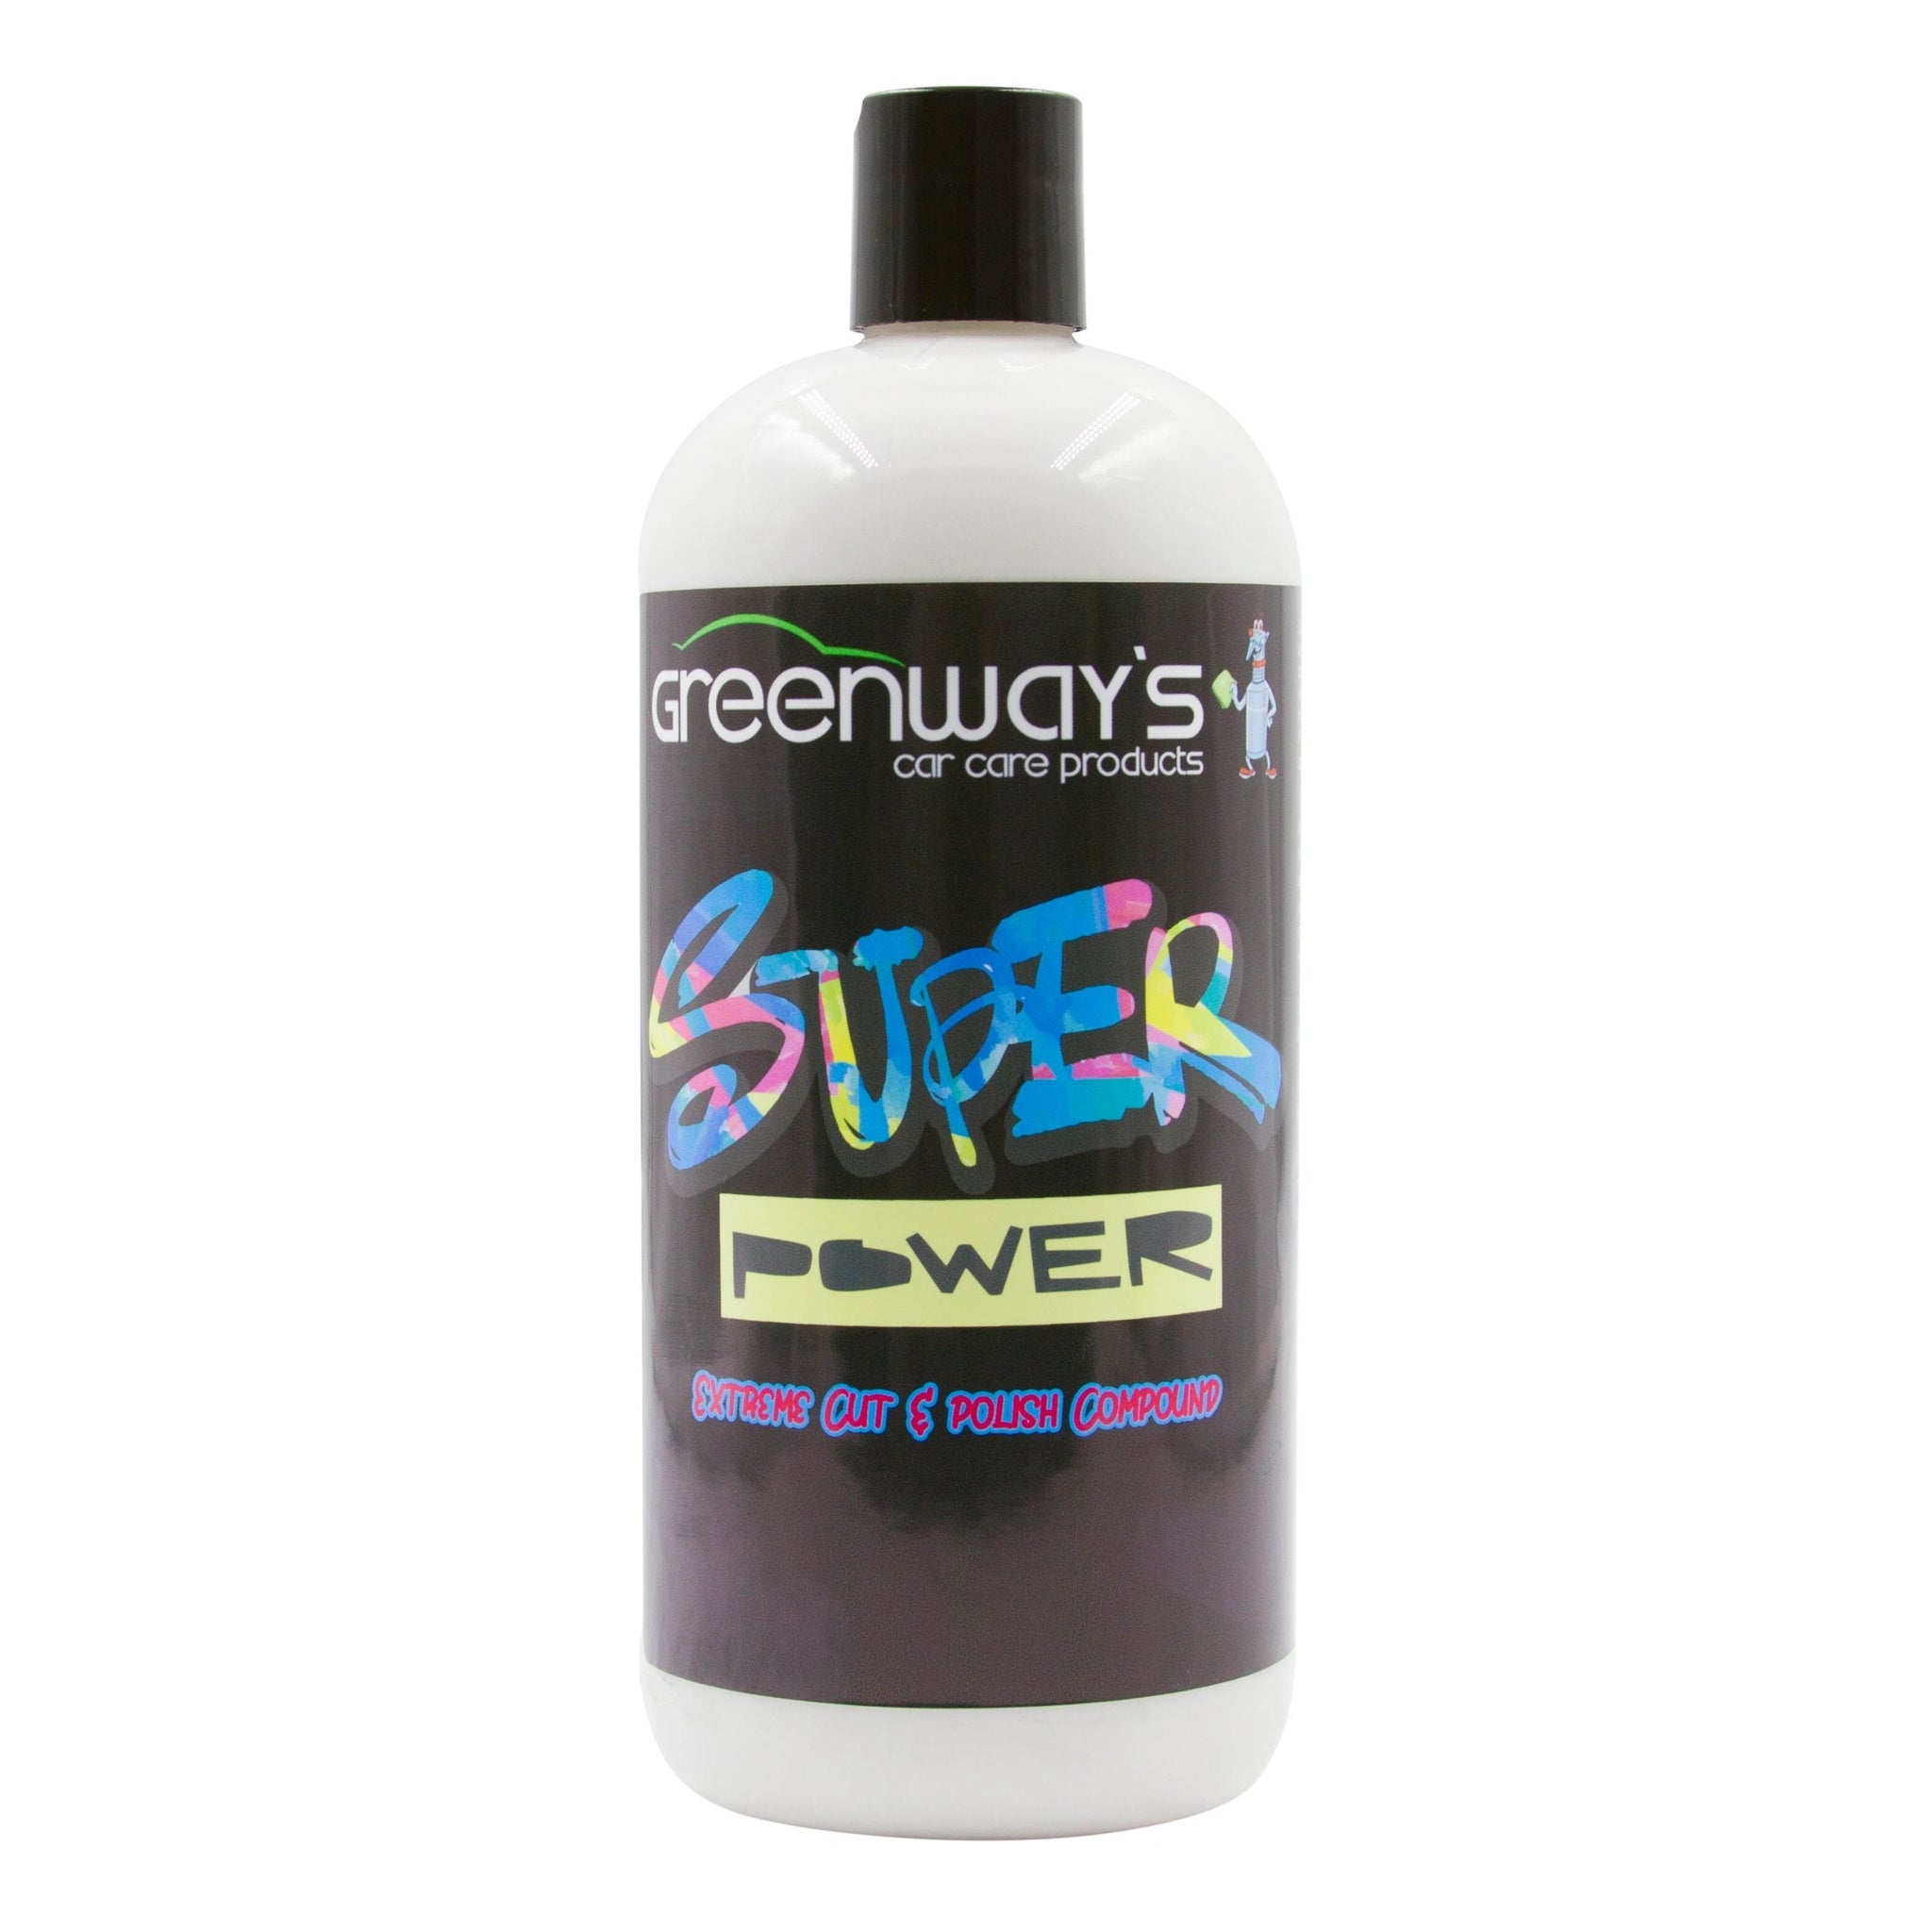 Greenway’s Super Power heavy scratch, major defect, highly aggressive cutting compound, light polisher, wax free, 32 ounces.